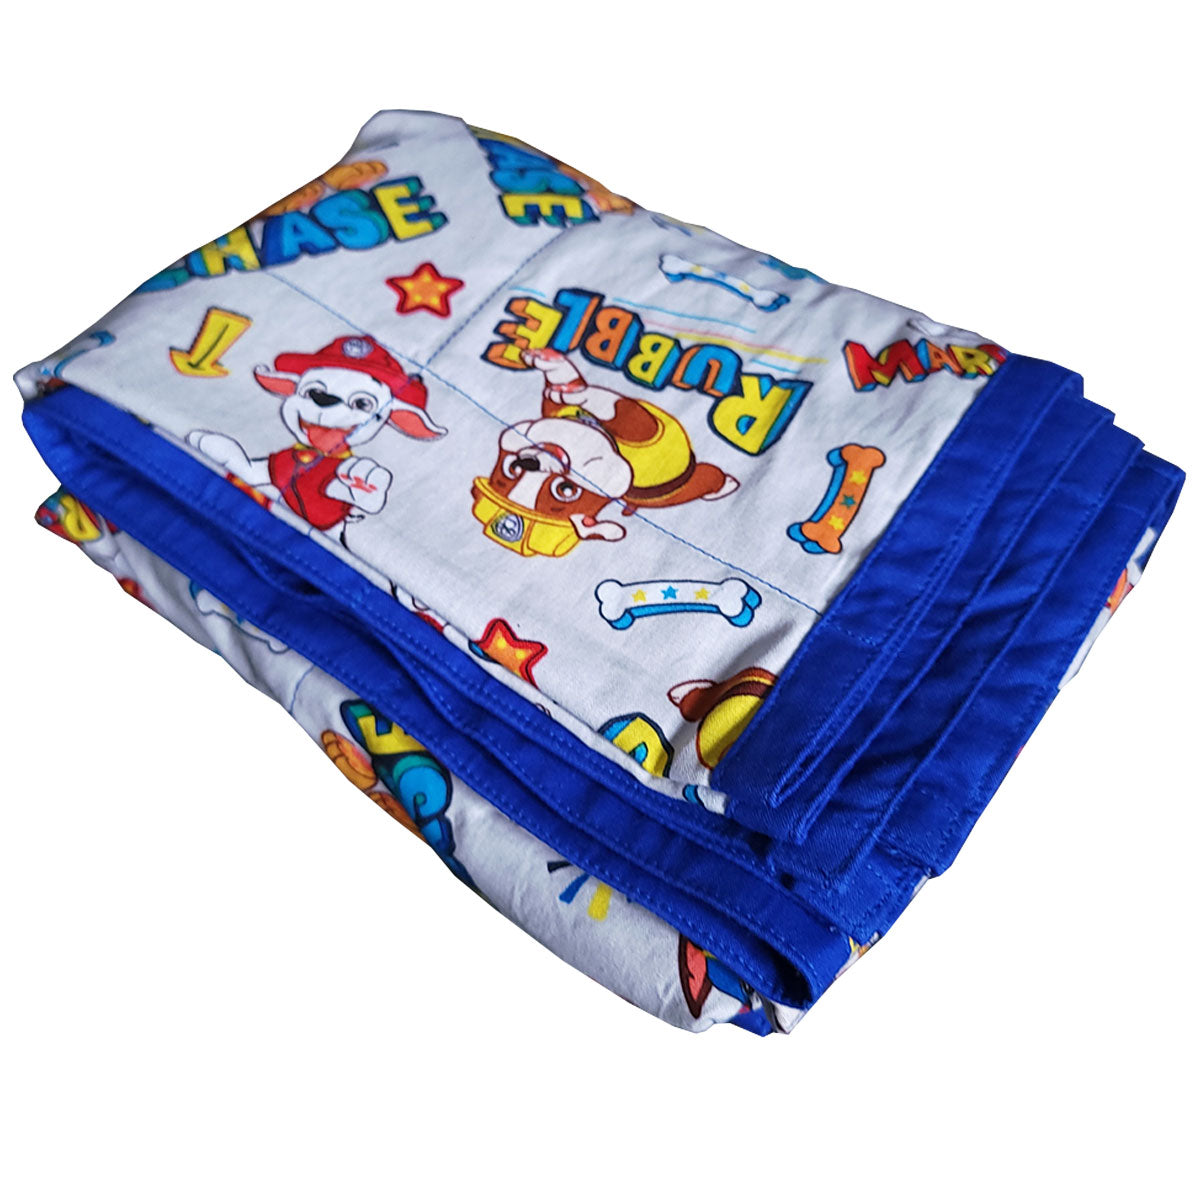 Clearance Weighted Blanket - Medium 5 lb Paw Patrol Blue with No Poly (for 30 lb user)